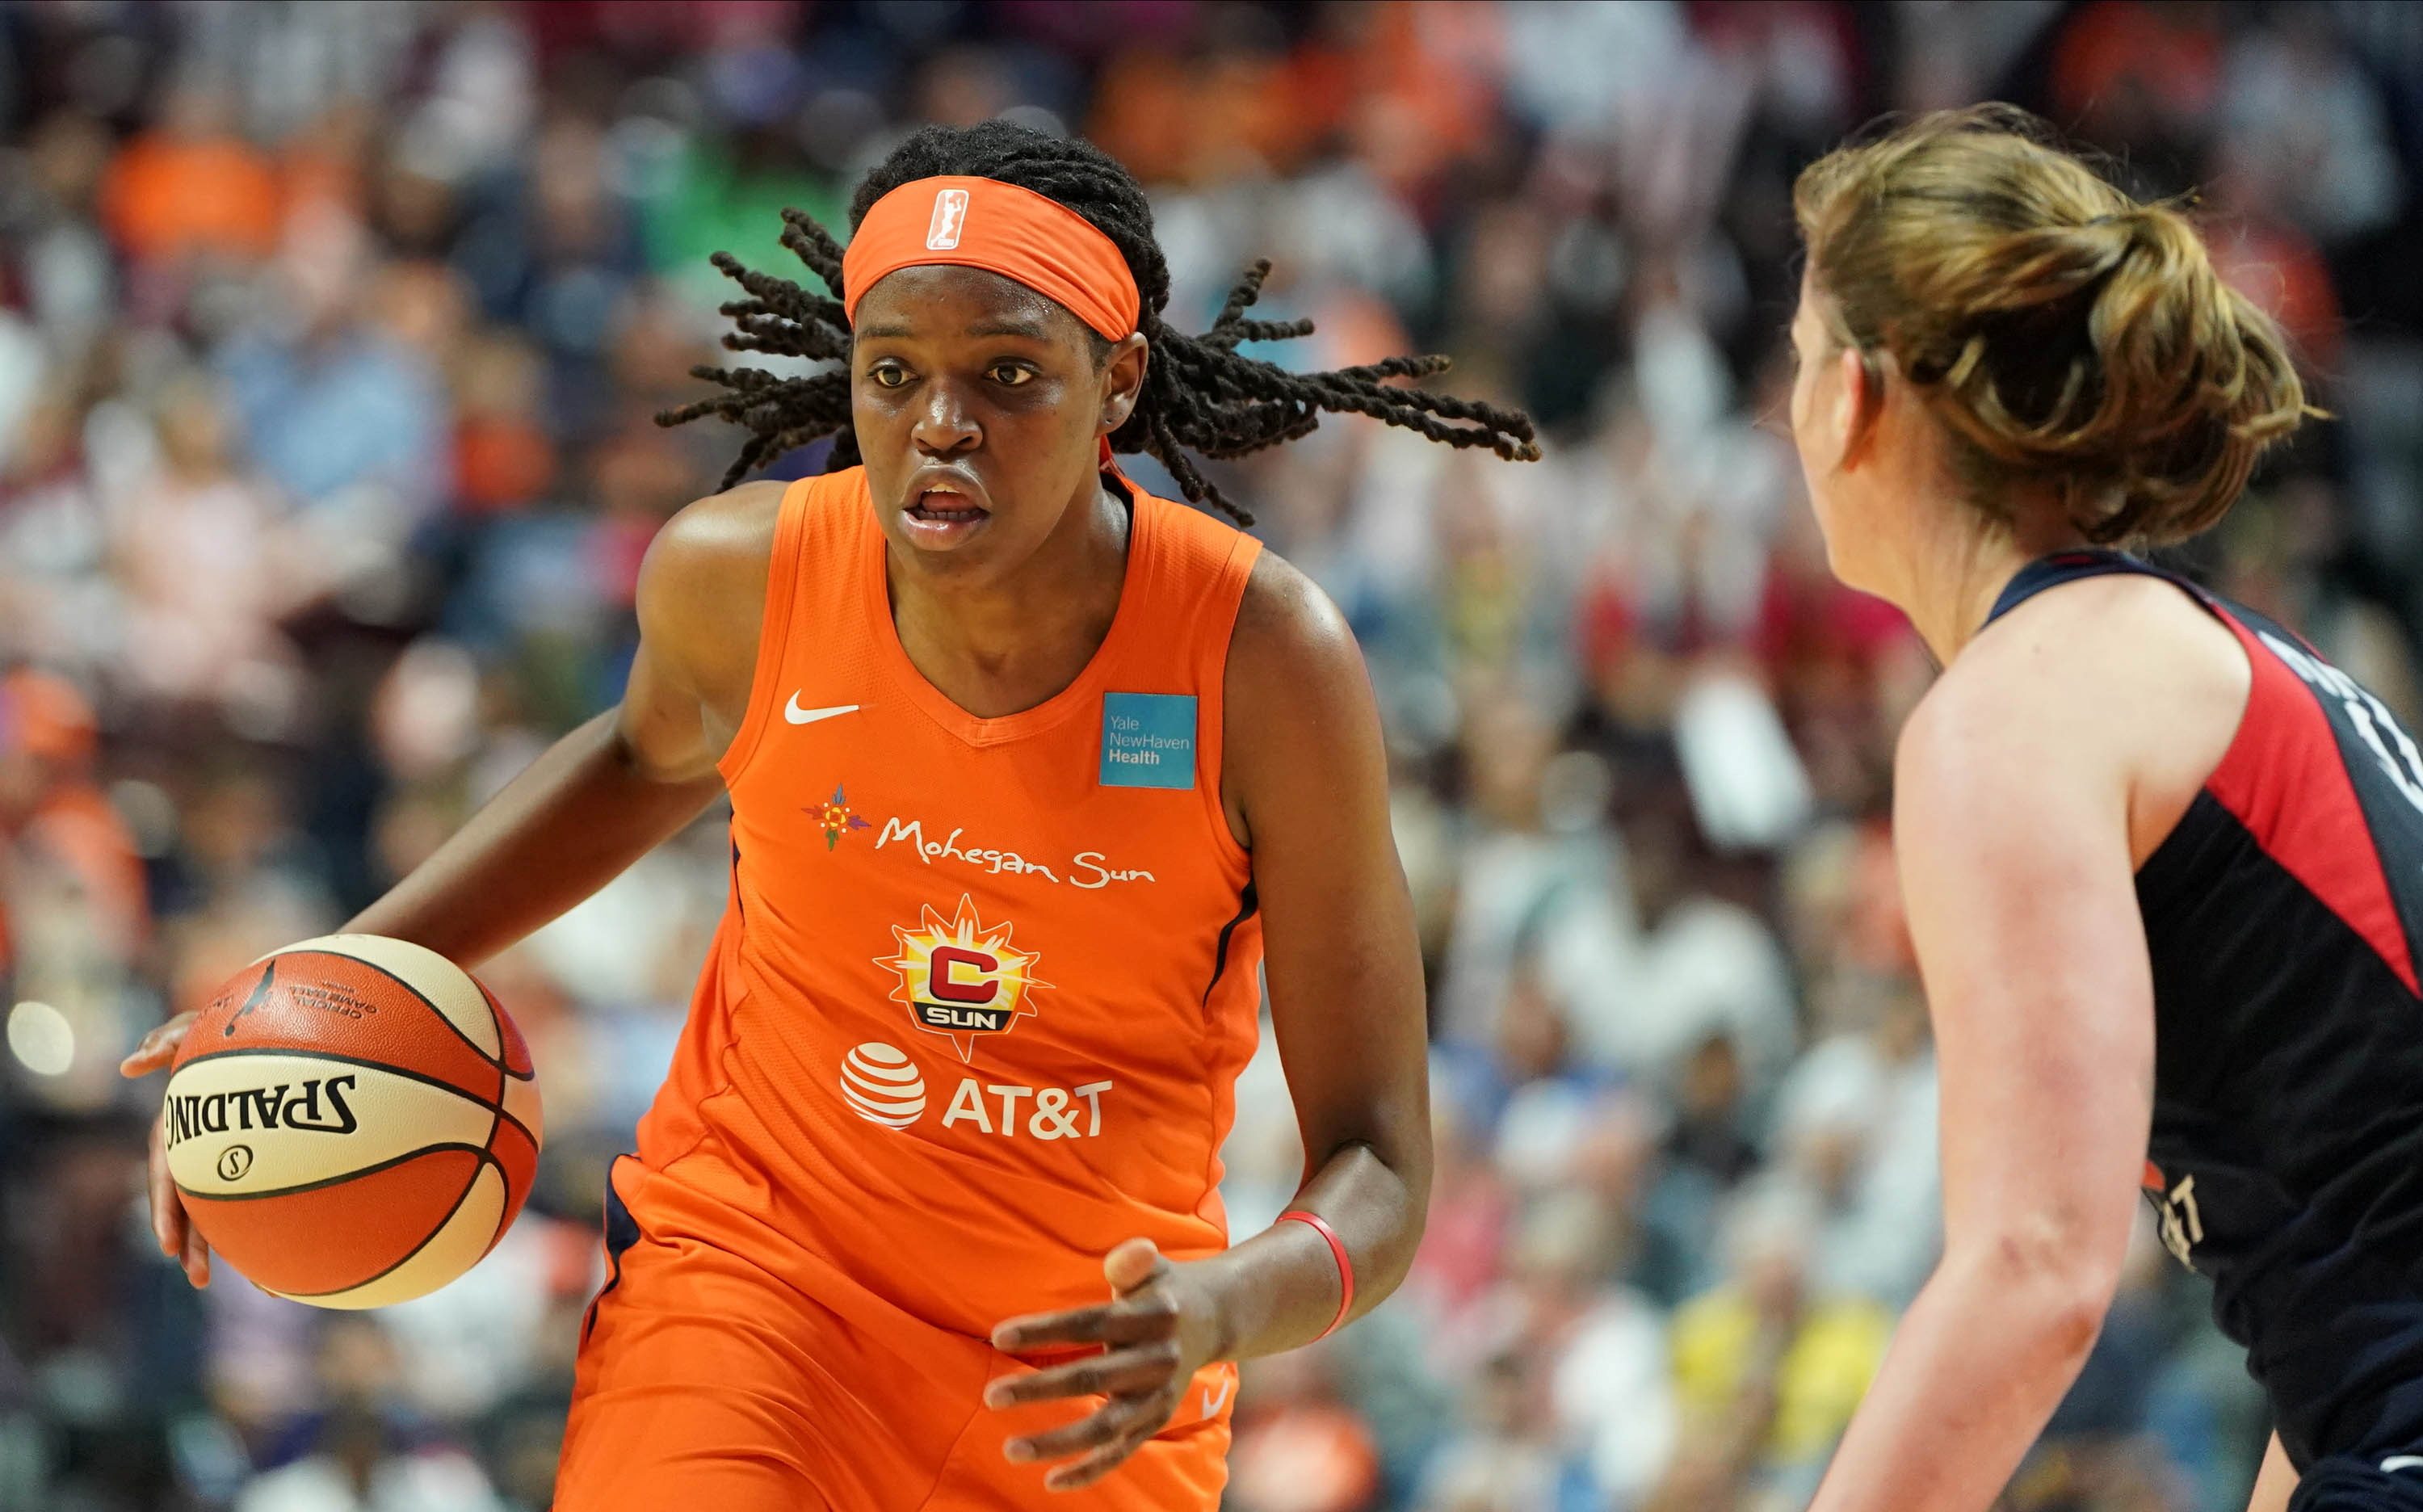 With an ‘underdog’ mentality, Connecticut’s Jones snares WNBA MVP